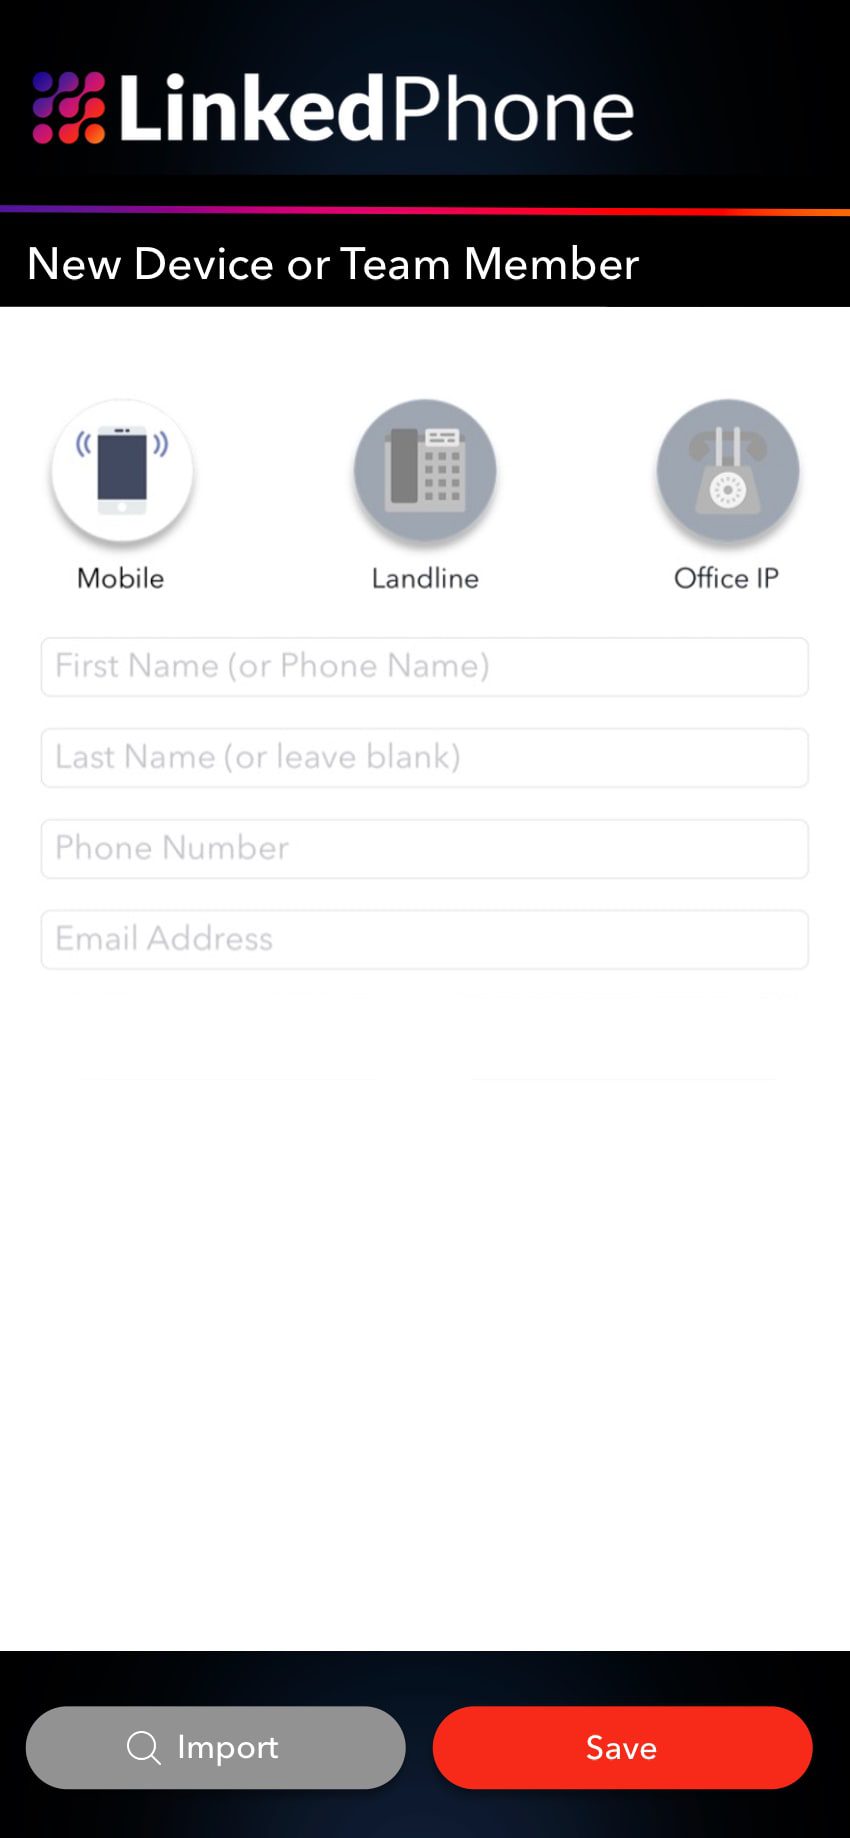 LinkedPhone App Screenshot - Add Team Member or New Device to Your Business Phone System